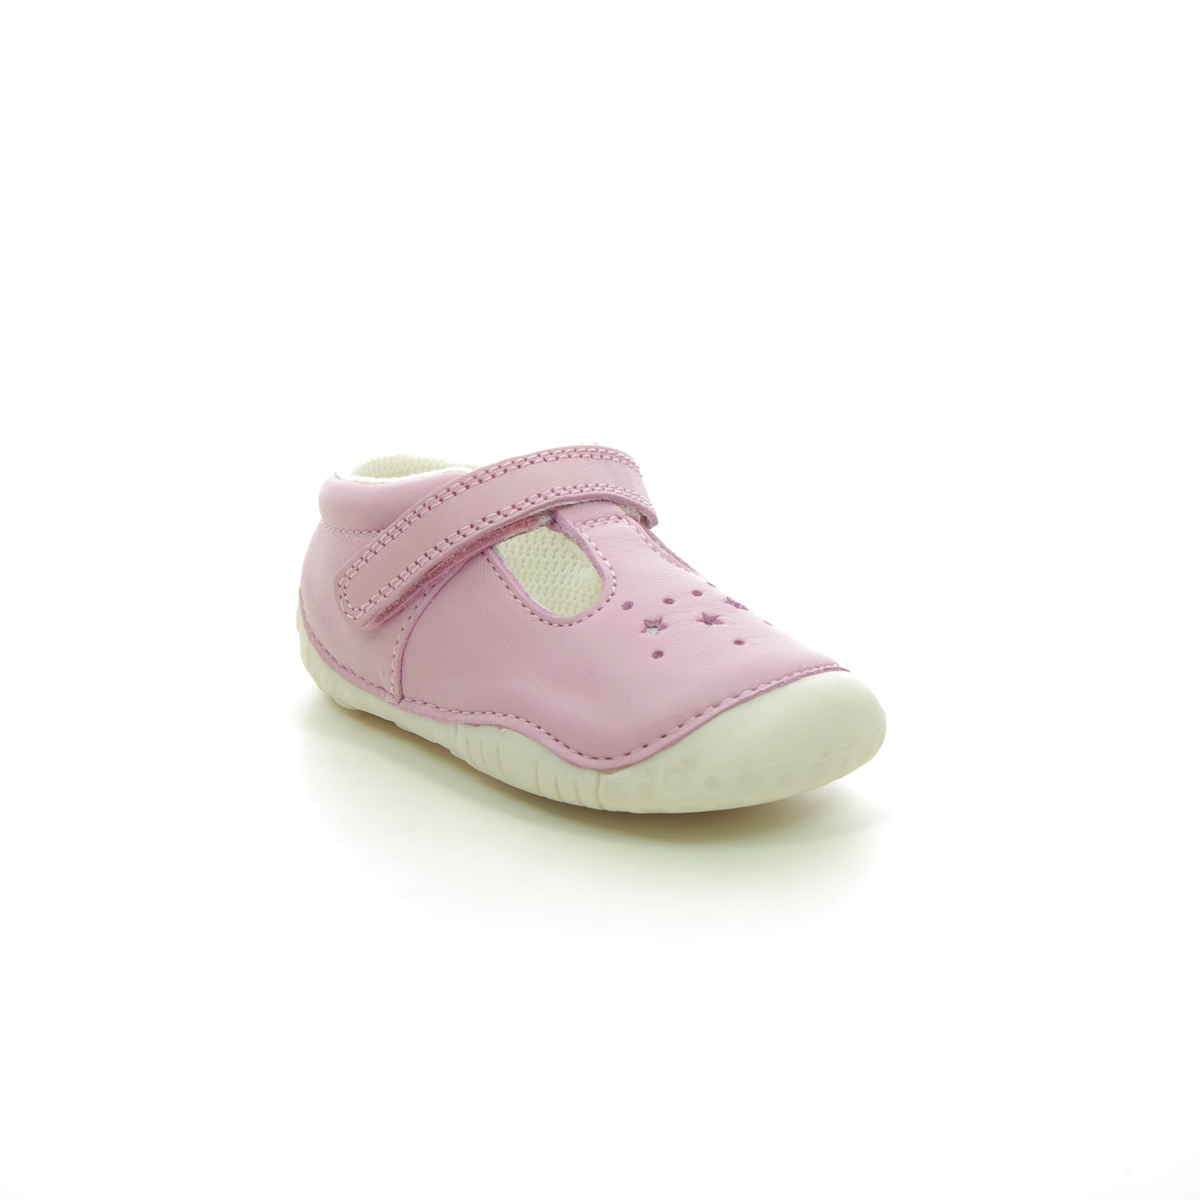 Start Rite - Tumble T Bar In Pink Leather 0761-66F In Size 3 In Plain Pink Leather First And Baby Shoes  In Pink Leather For kids